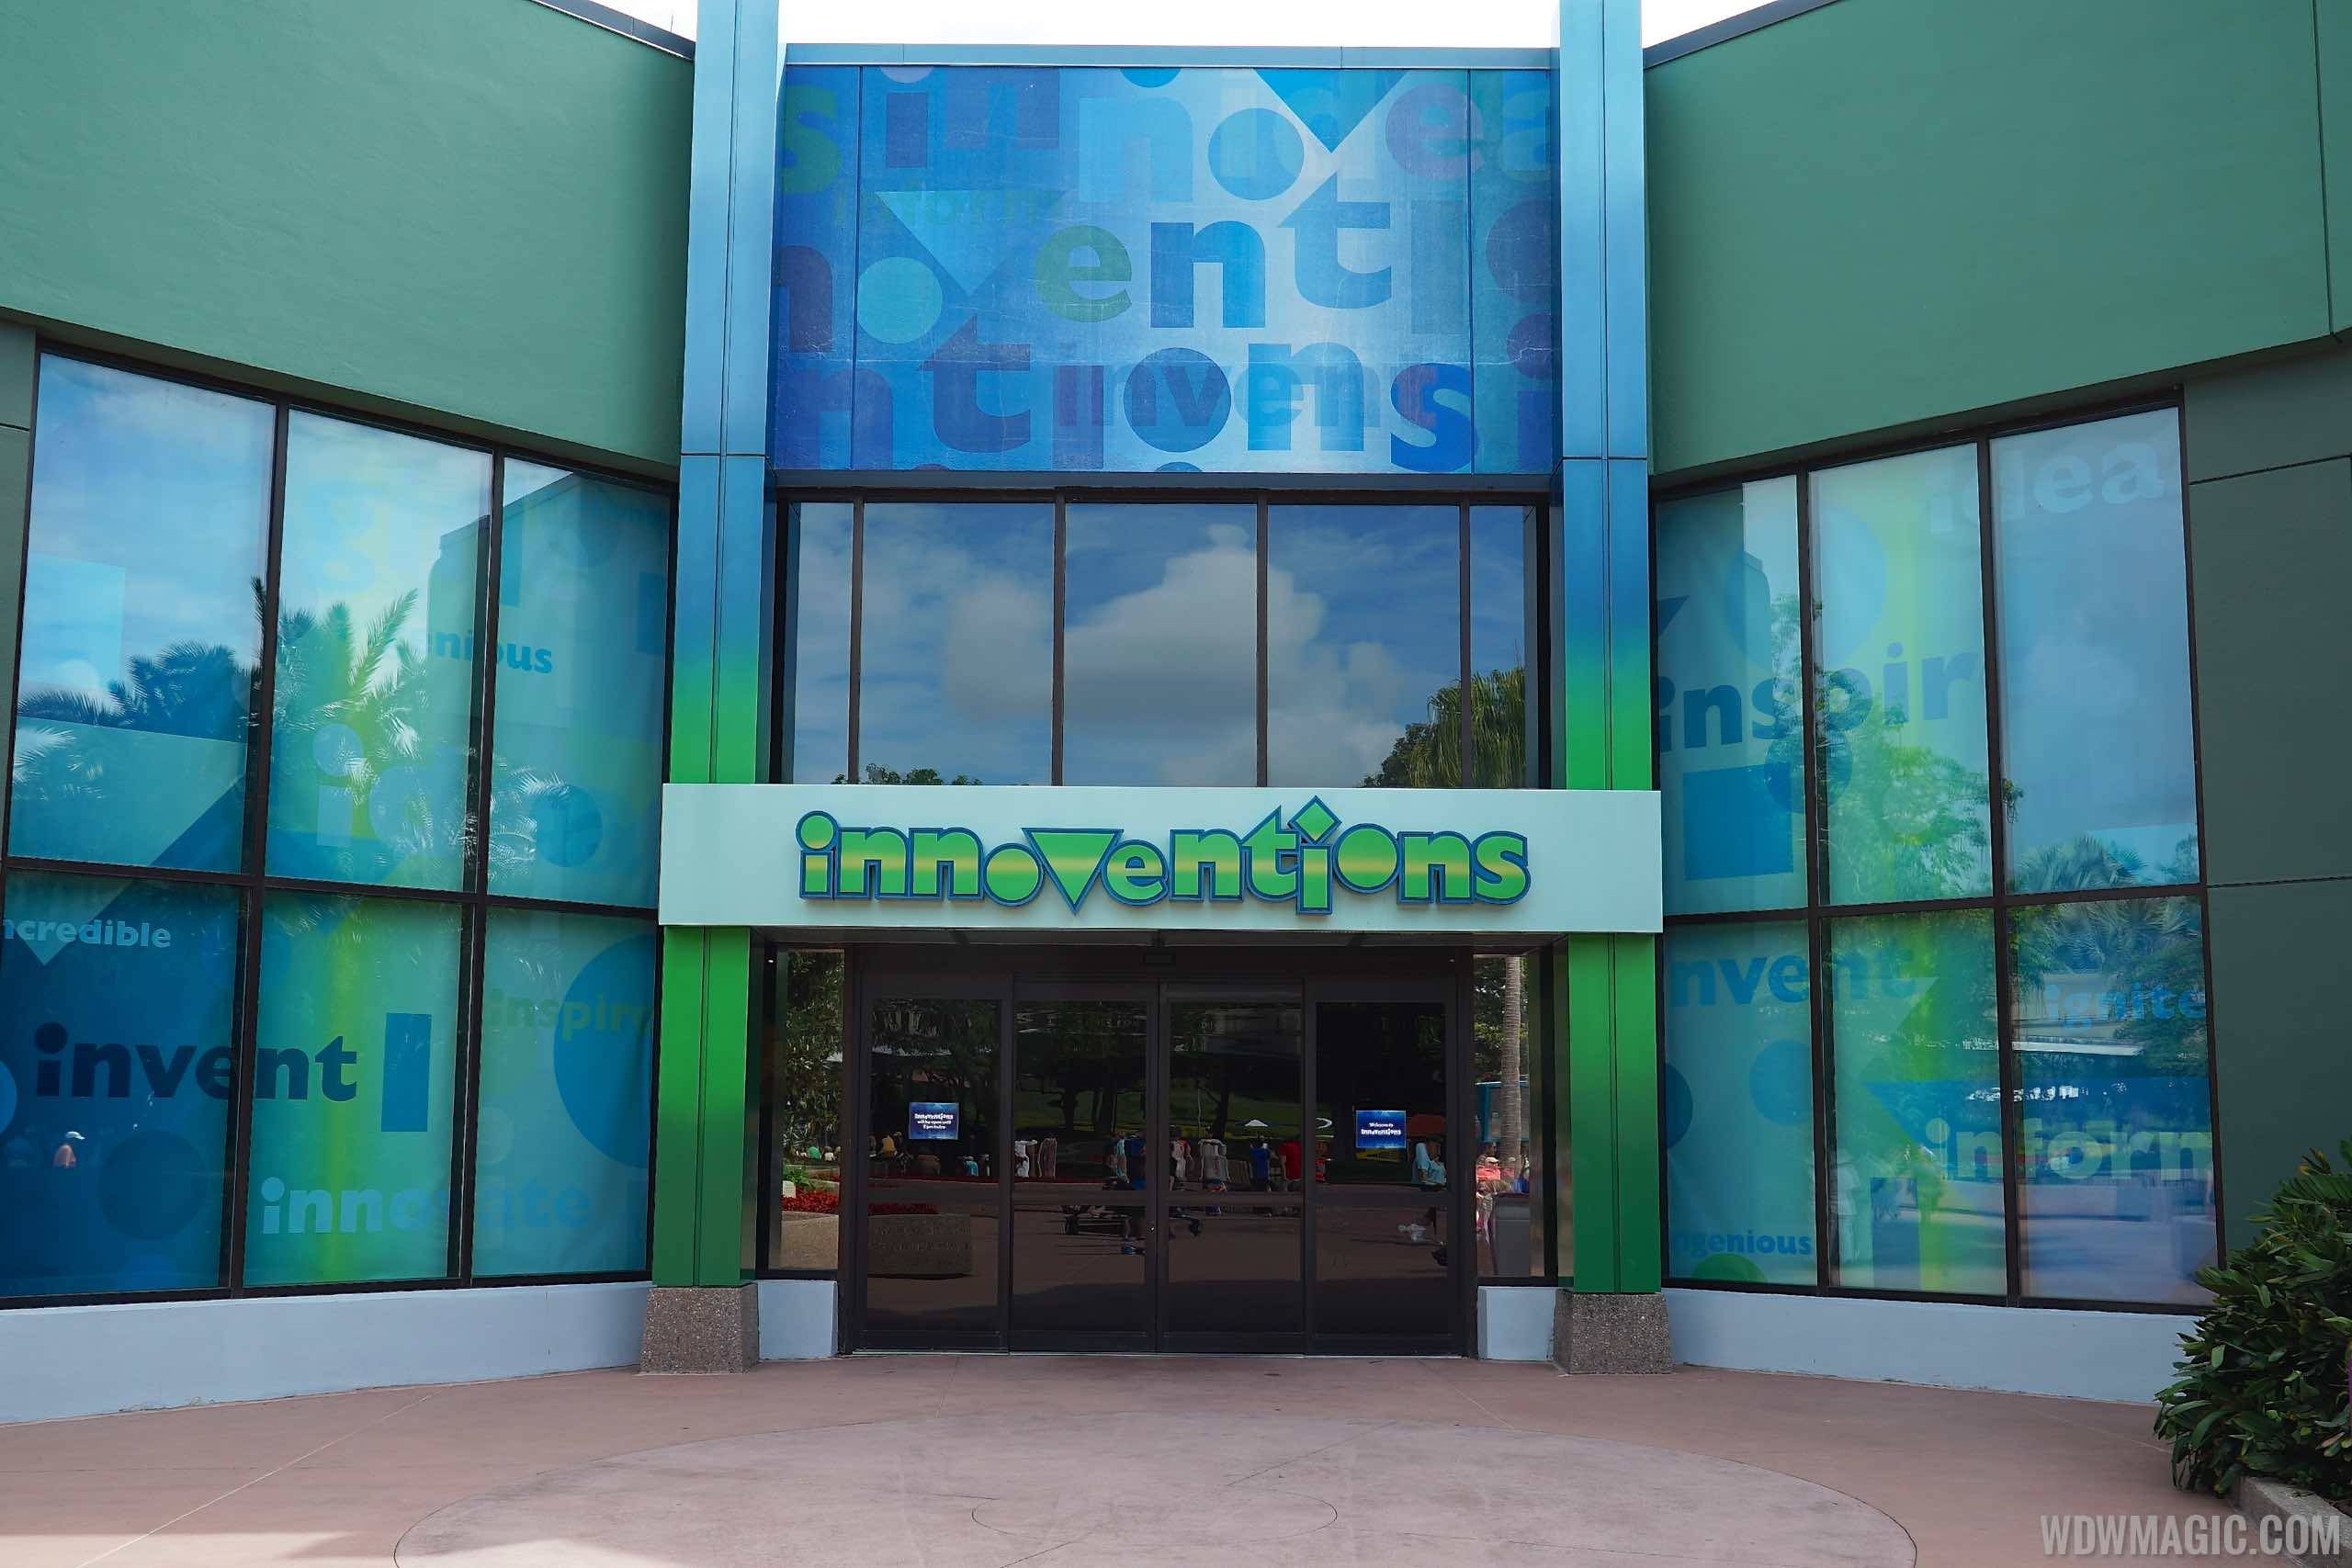 Disney Visa meet and greet at Epcot's Innoventions now has extended hours